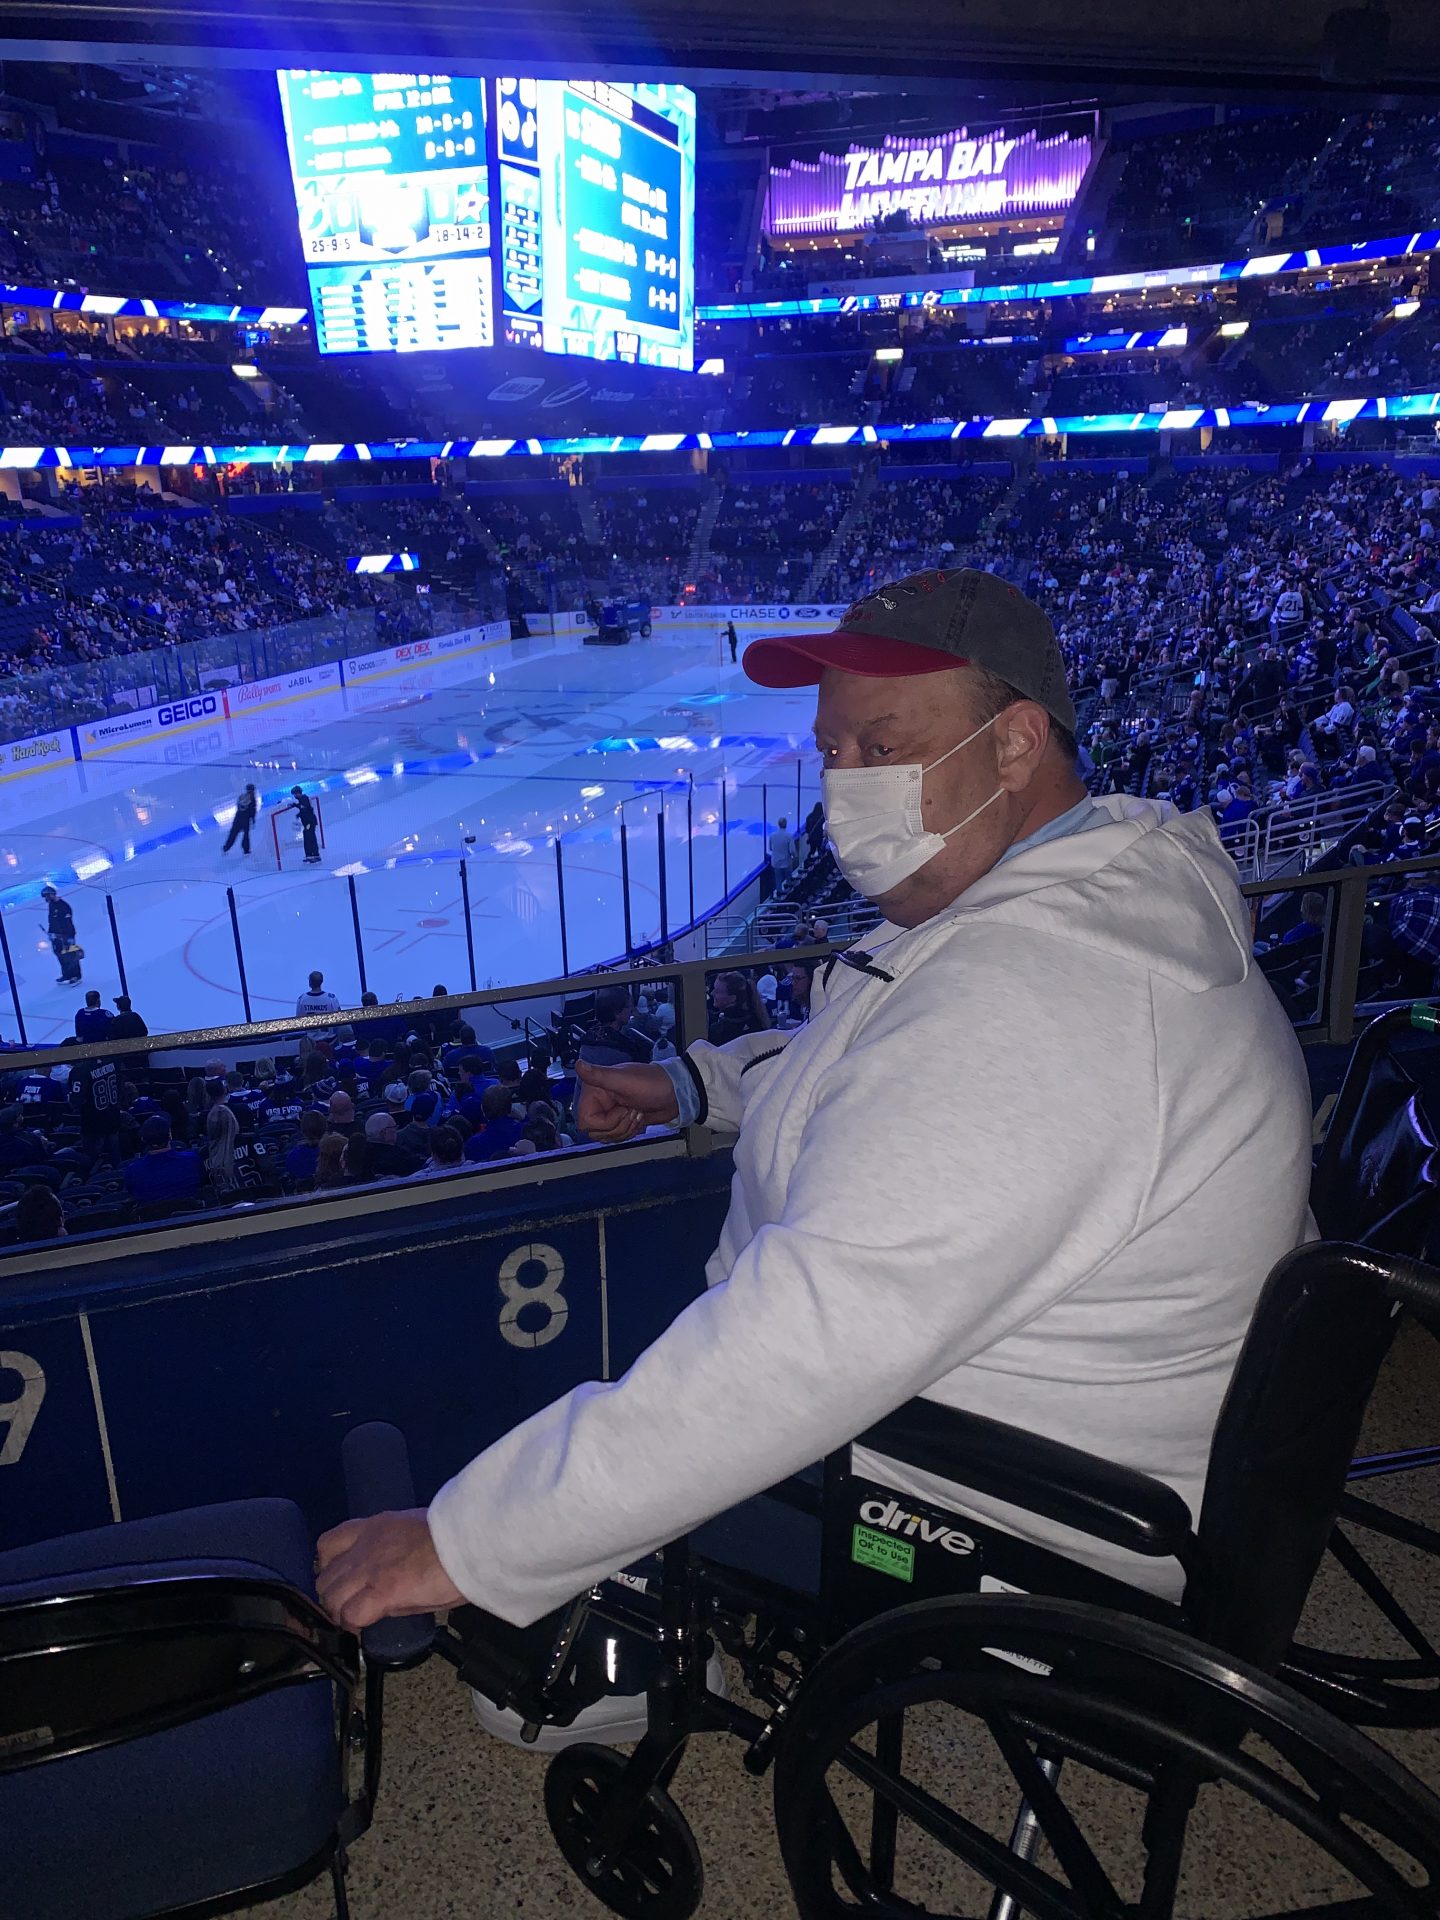 Steve at the Ice Hockey game January 15, 2022 in Tampa, Florida. The team we wanted to win was Tampa Lightning Bolts and they defeated the Dallas Stars.